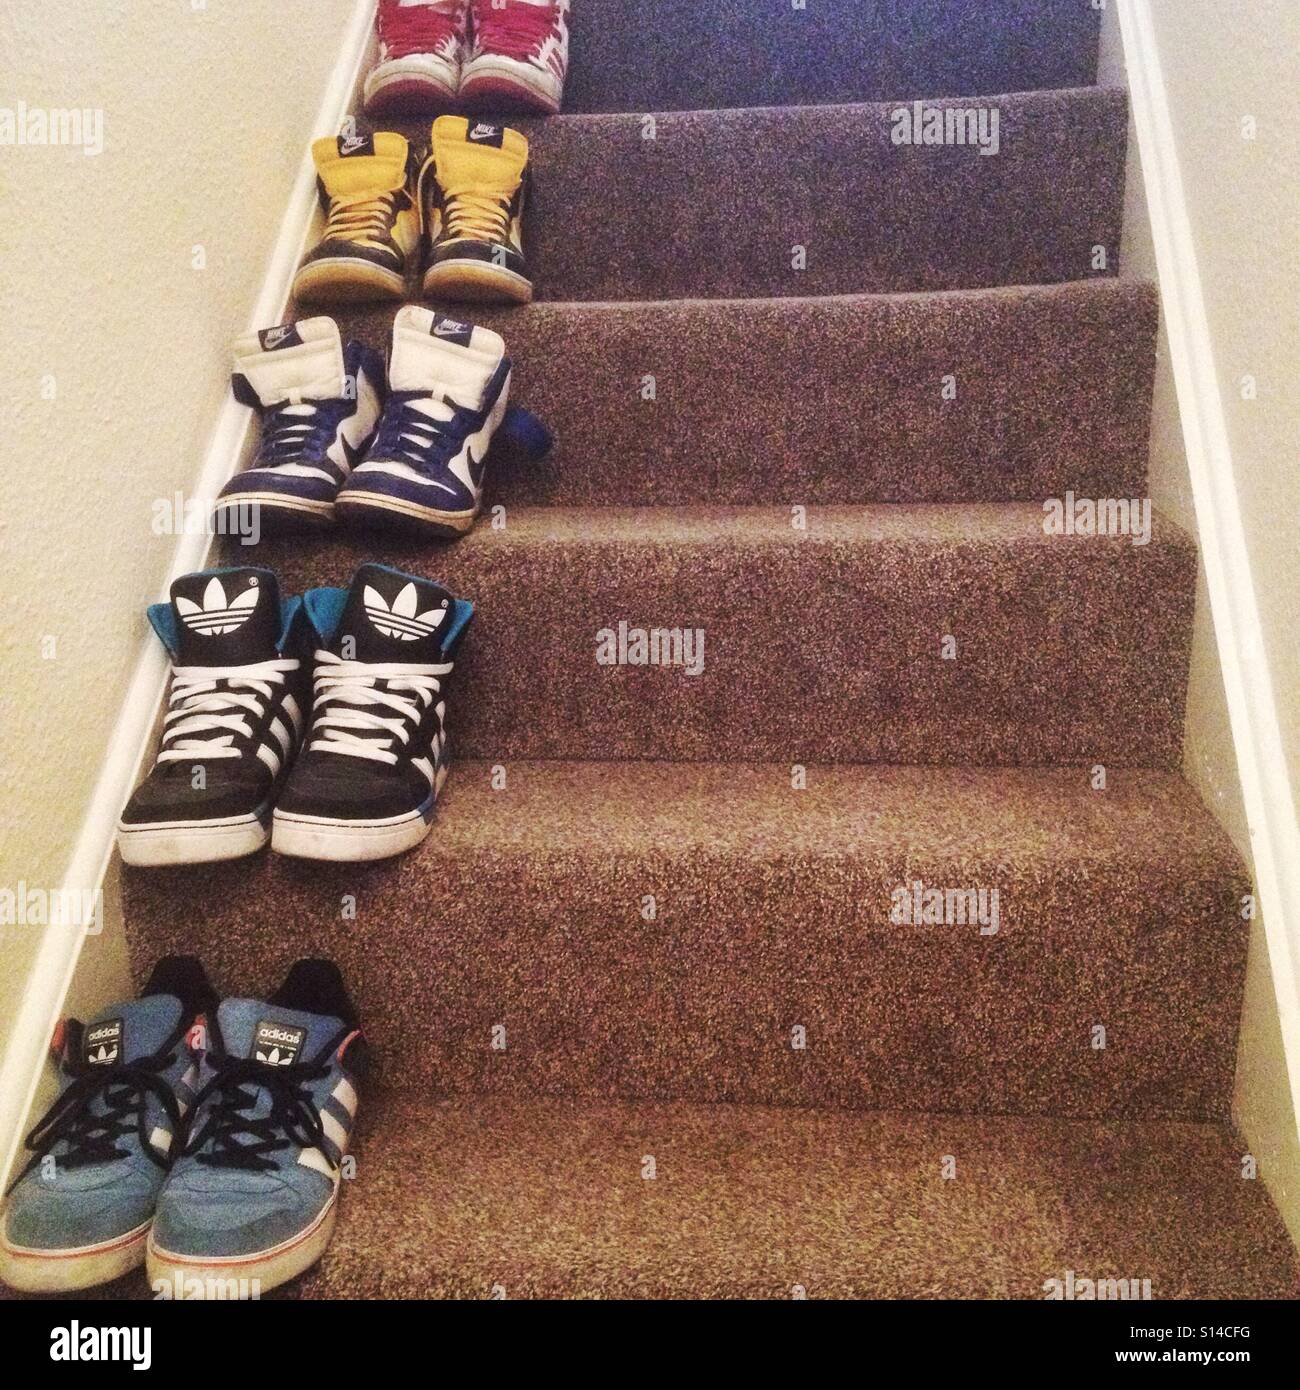 Trainers on the stairs. Stock Photo